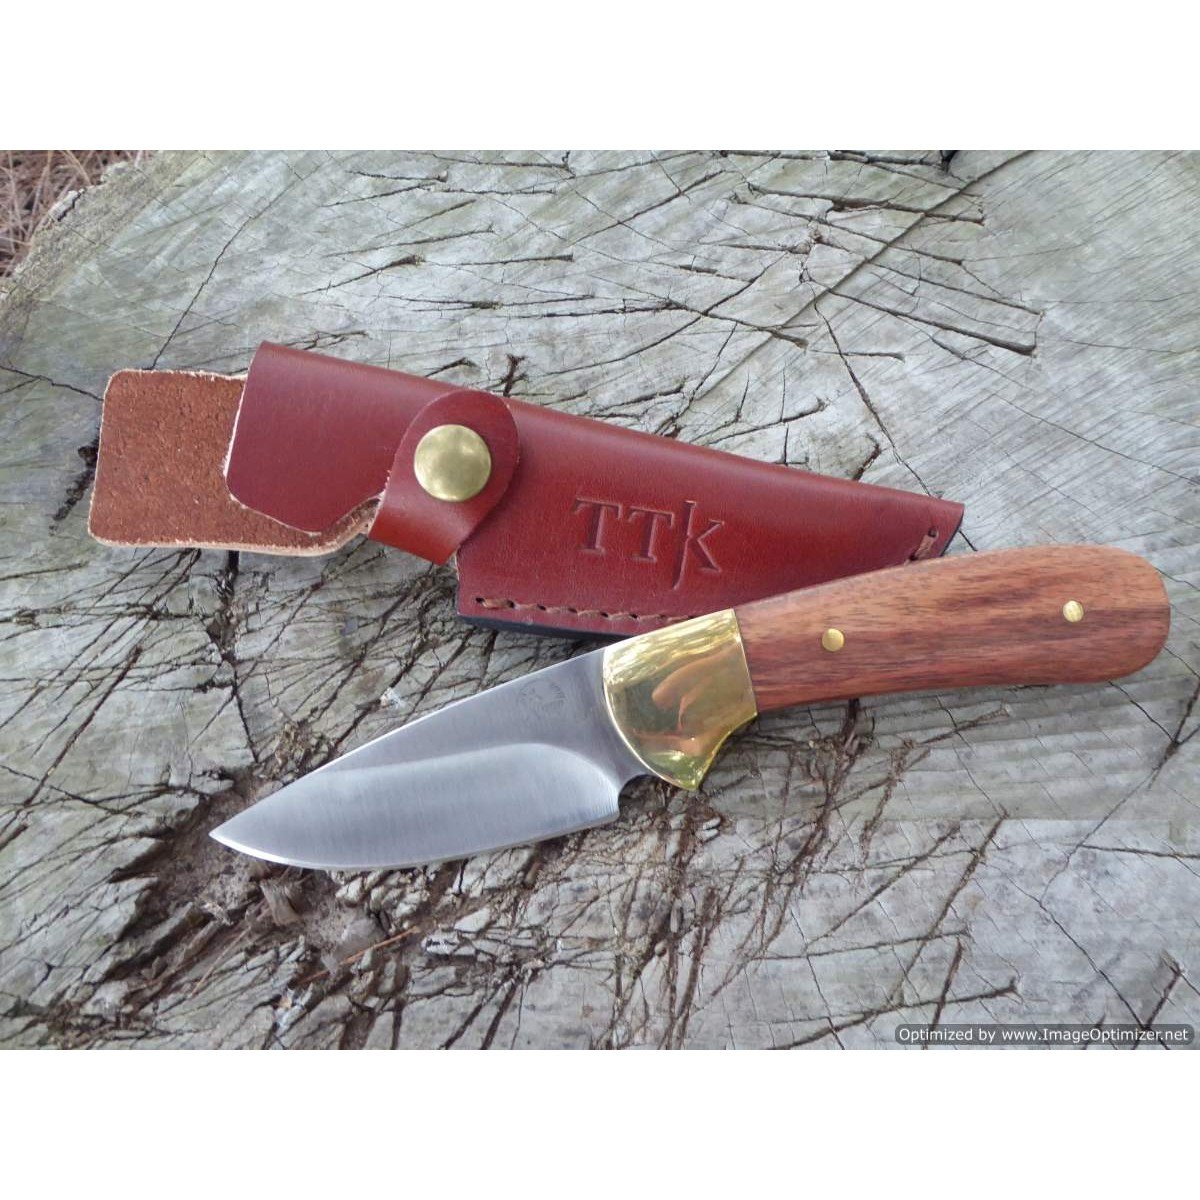 tassie tiger knives 3 1skinning knife with leather sheath a2712 1200x1200 1